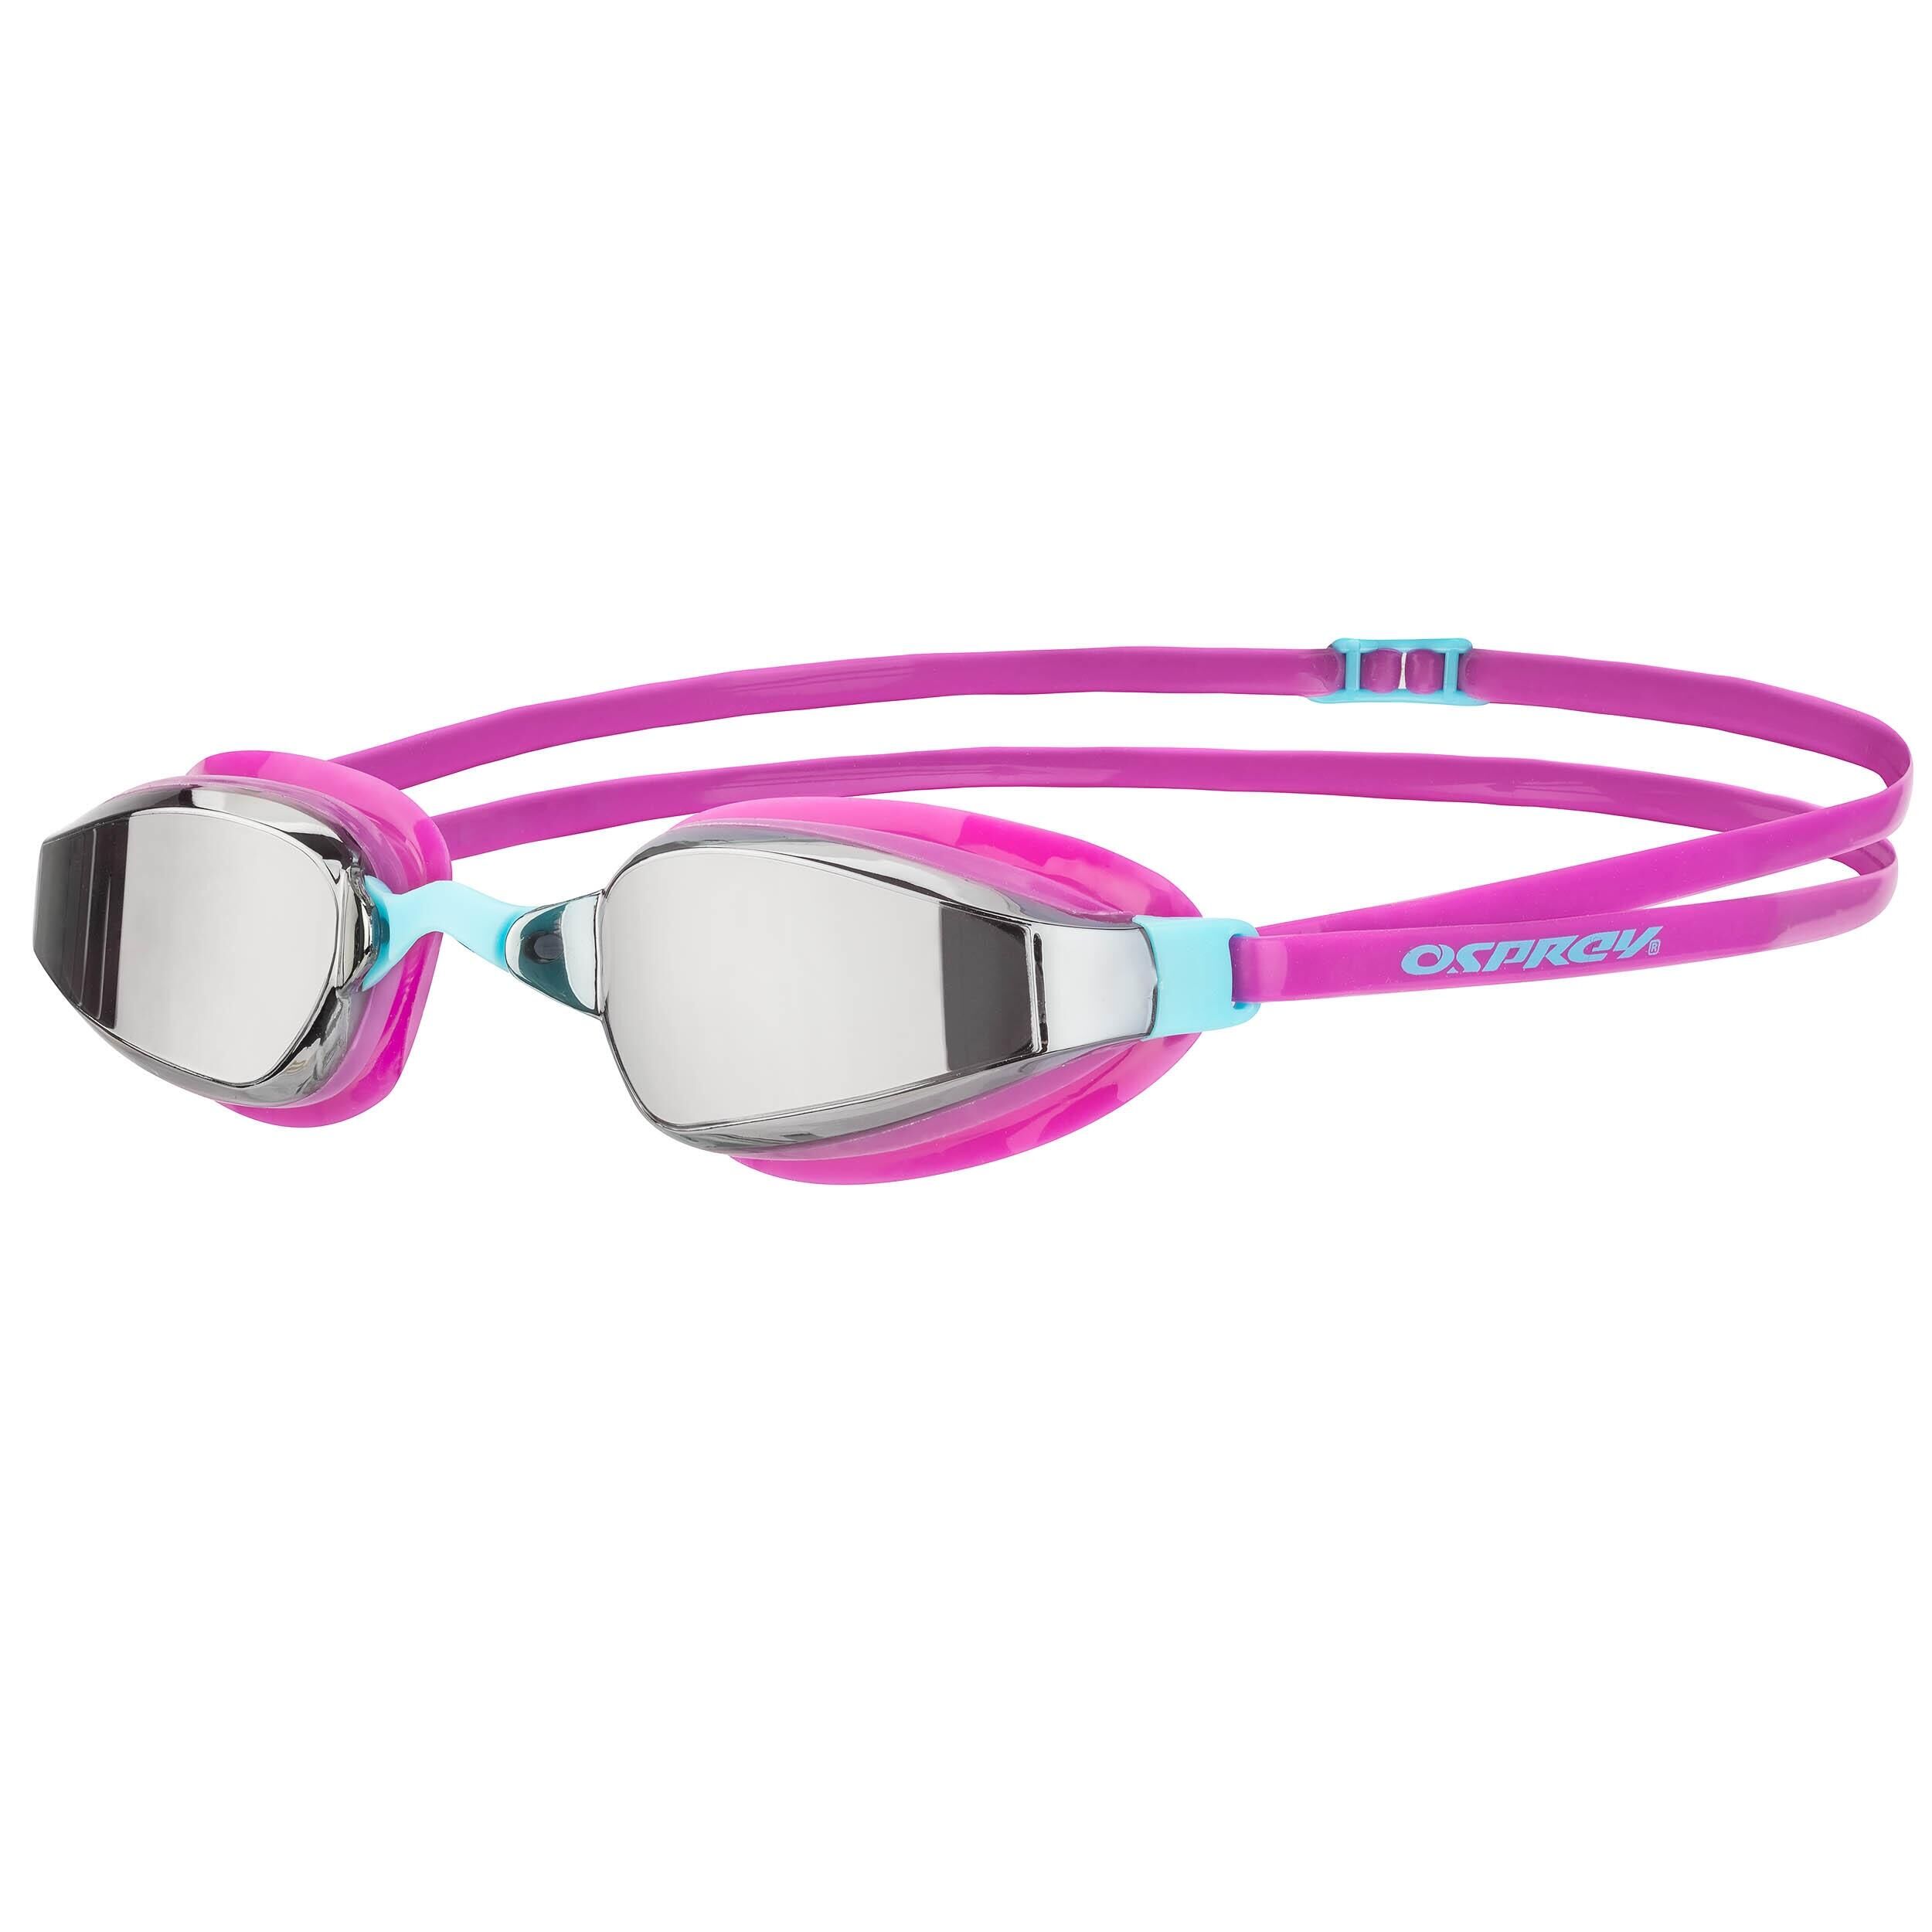 OSPREY ACTION SPORTS Osprey Adult Goggles with UV Protection and Anti Fog Wide View Lens Purple